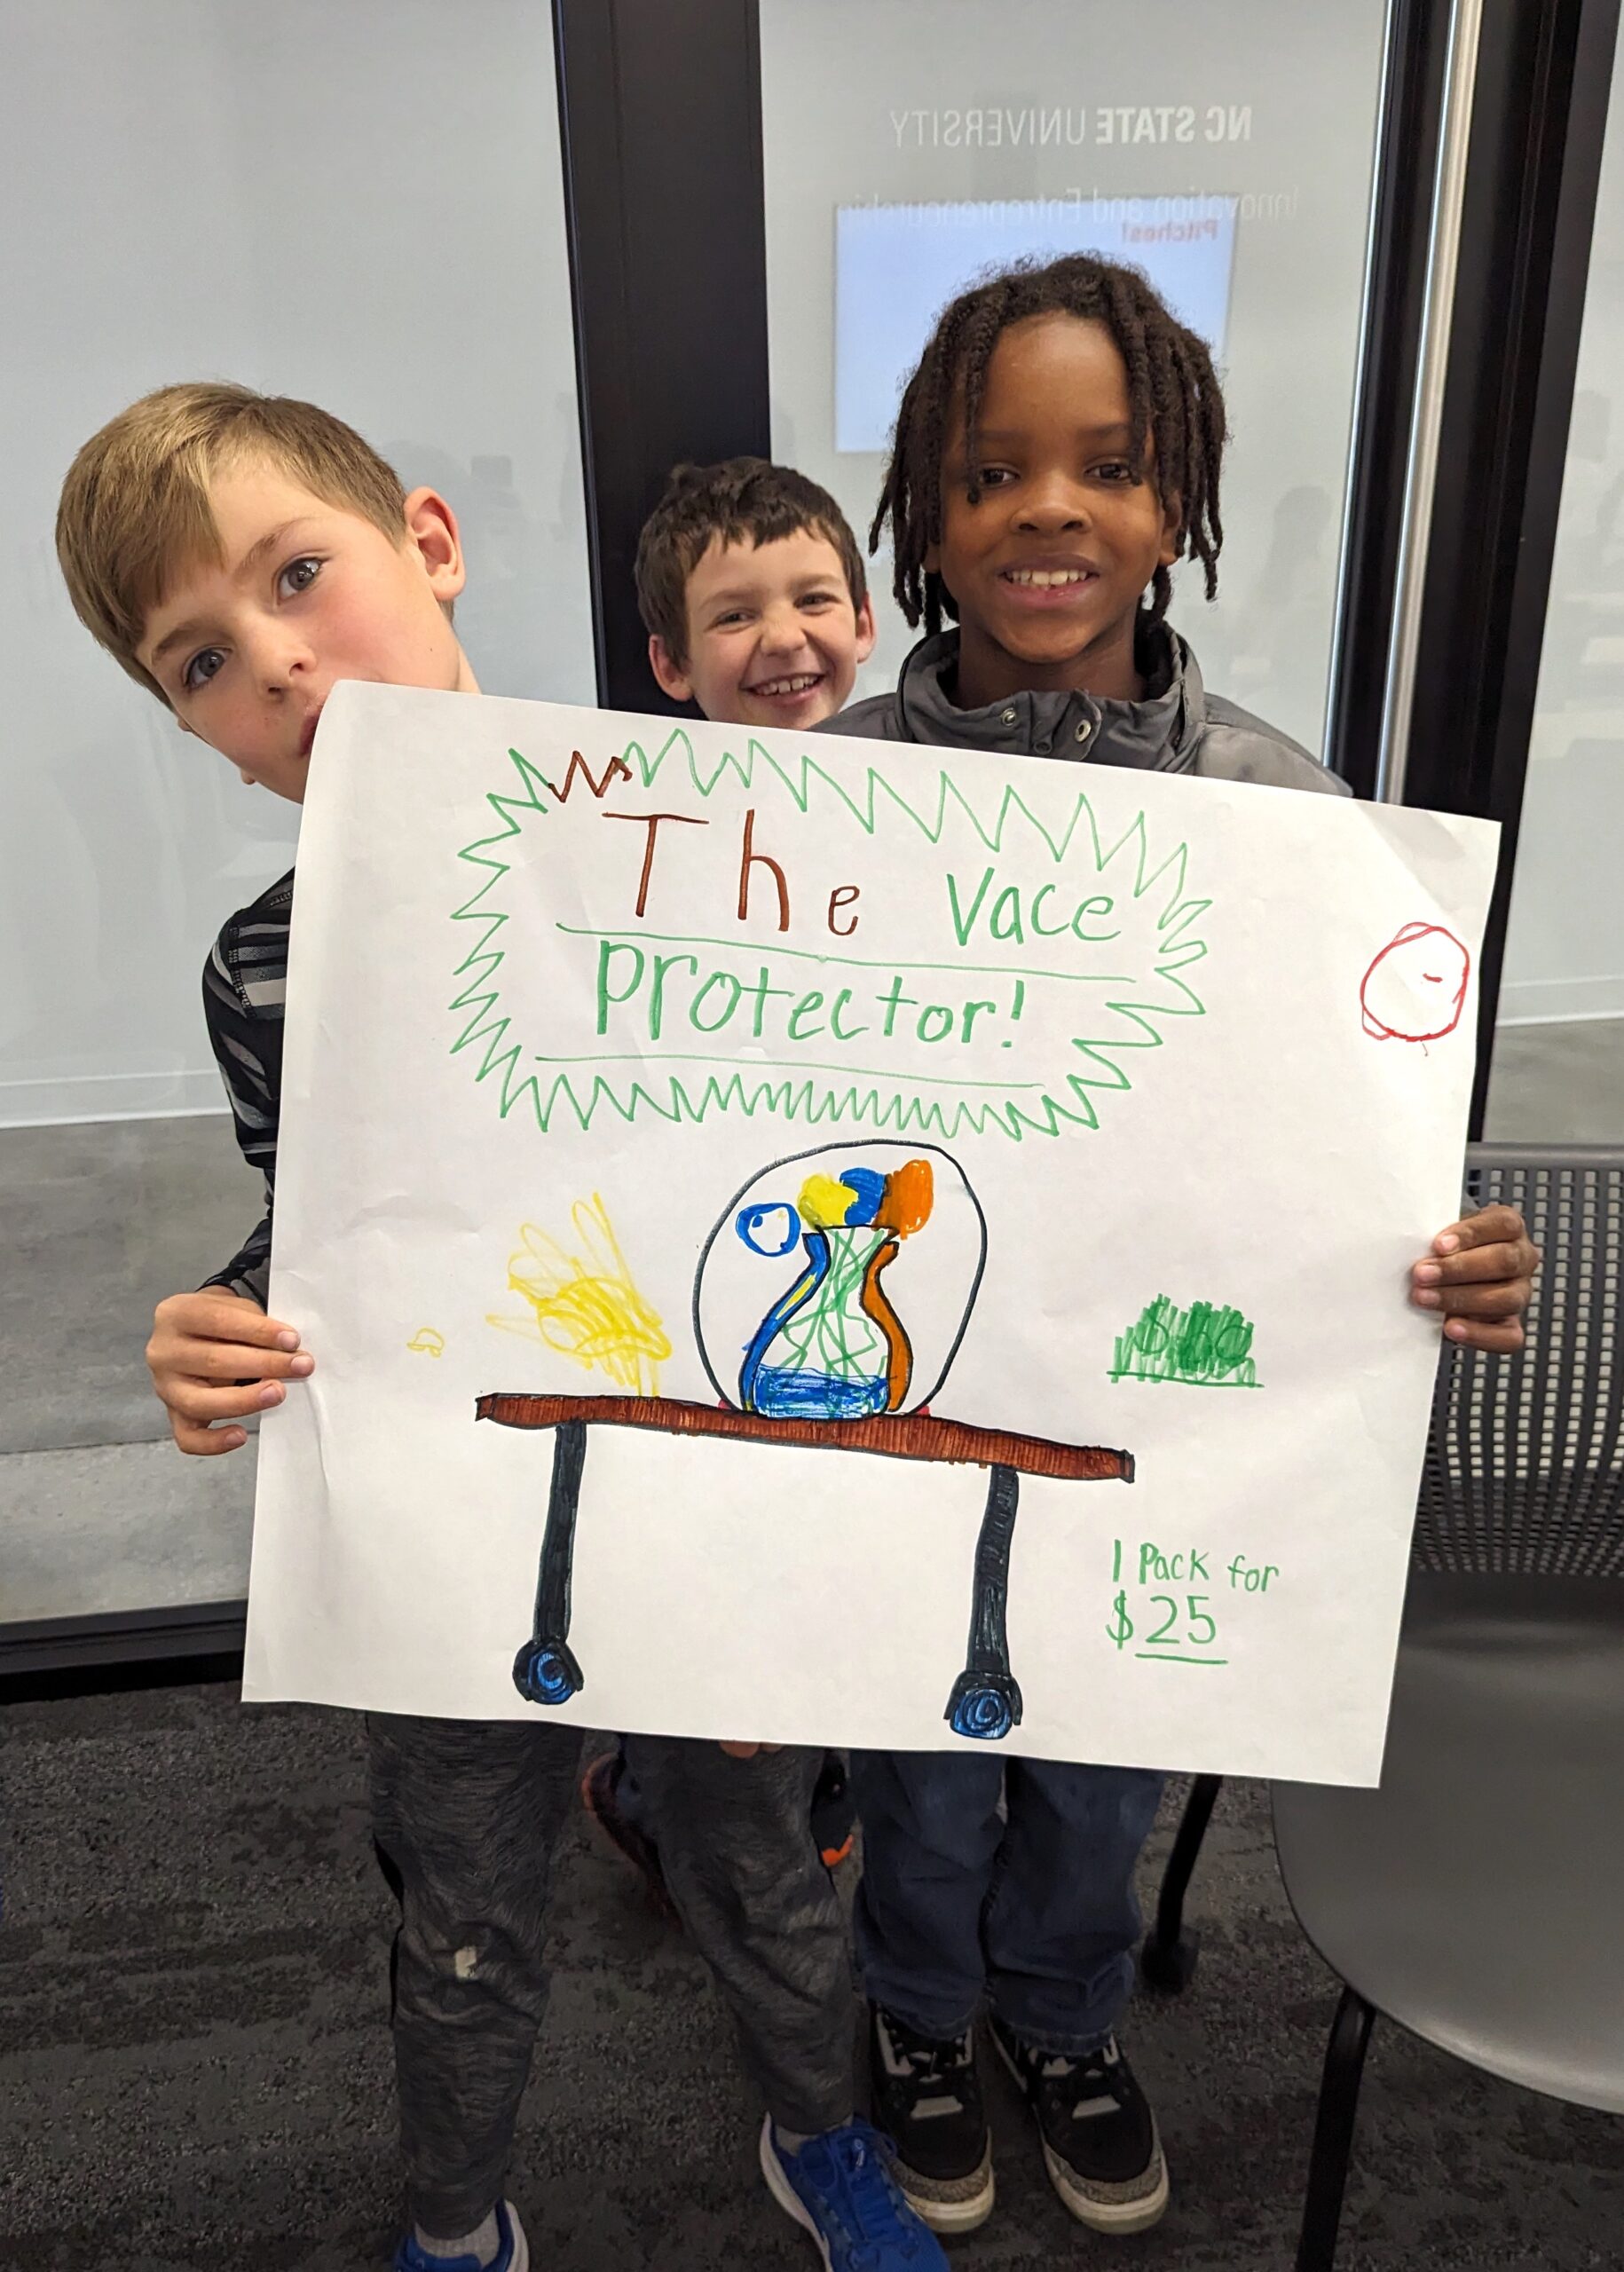 Three boys holding up a poster illustrating "the vace protector" invention, which is a globe that sits over a vase on a table.